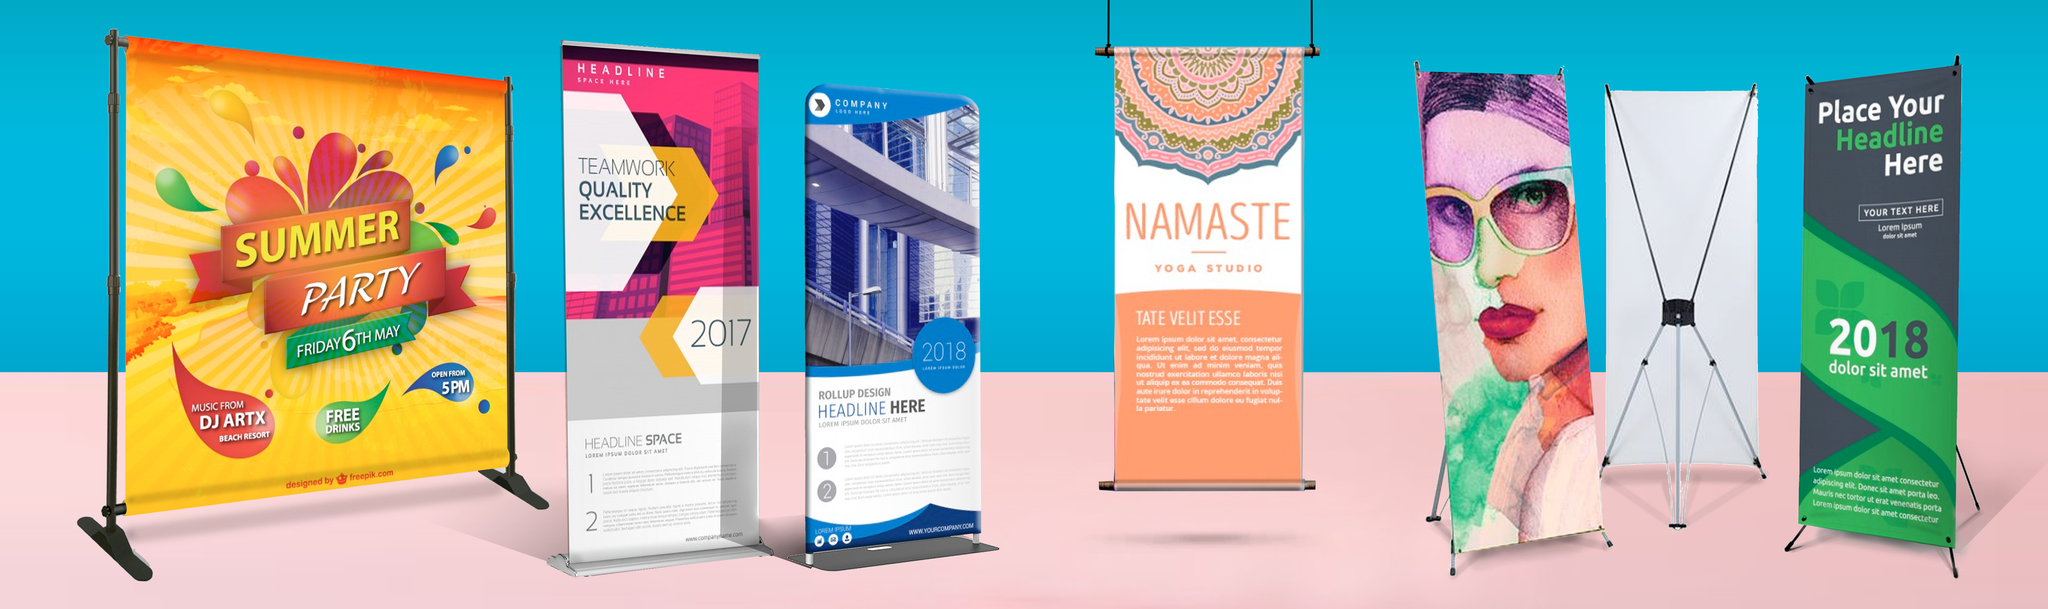 custom printed banners and stand up banners in Miami, FL